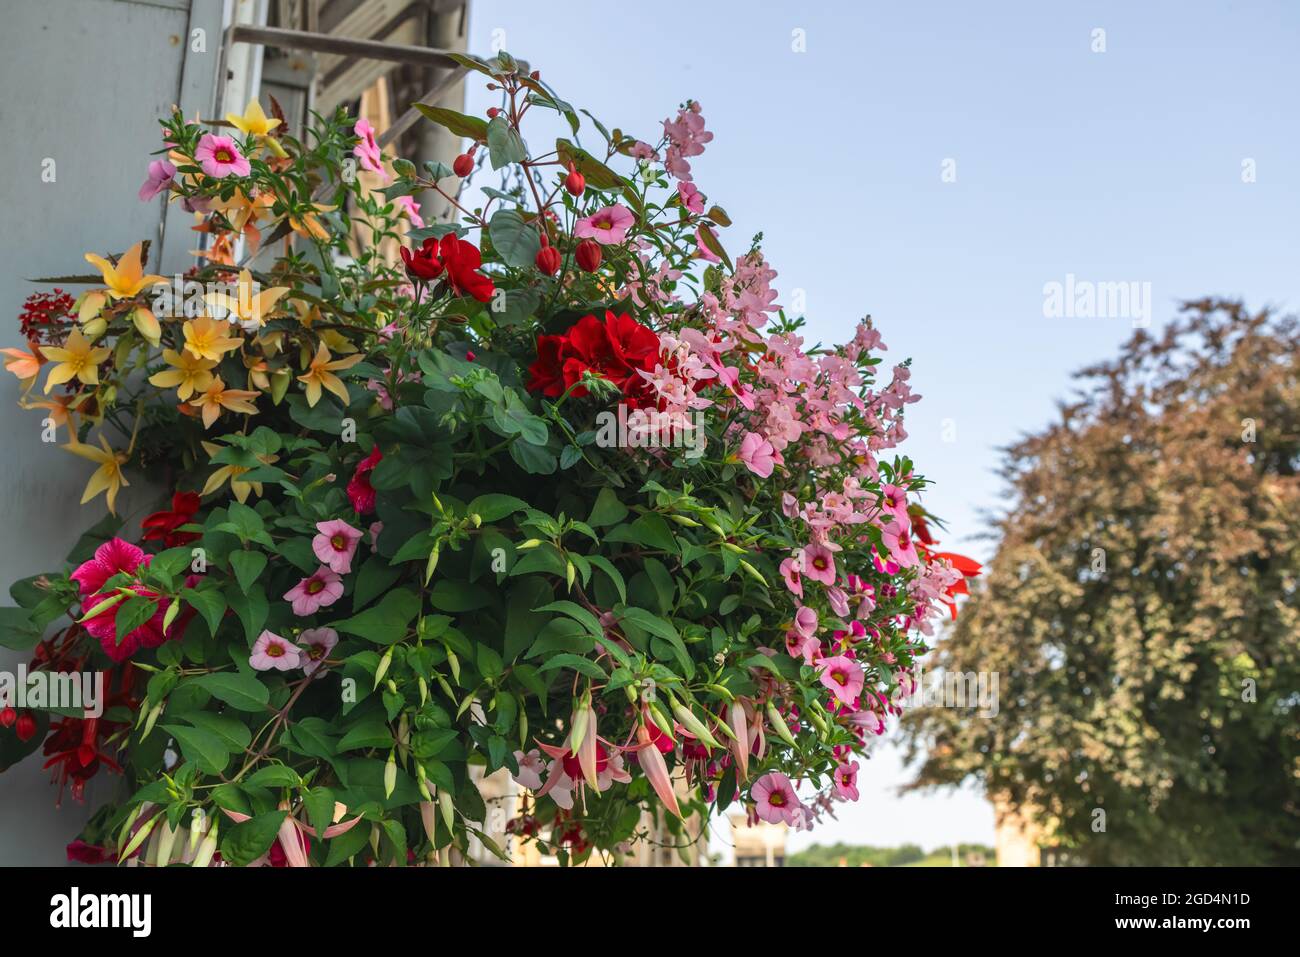 Mixed red, purple, orange and pink flowers eye-catching outdoors hanging flower basket. Stock Photo